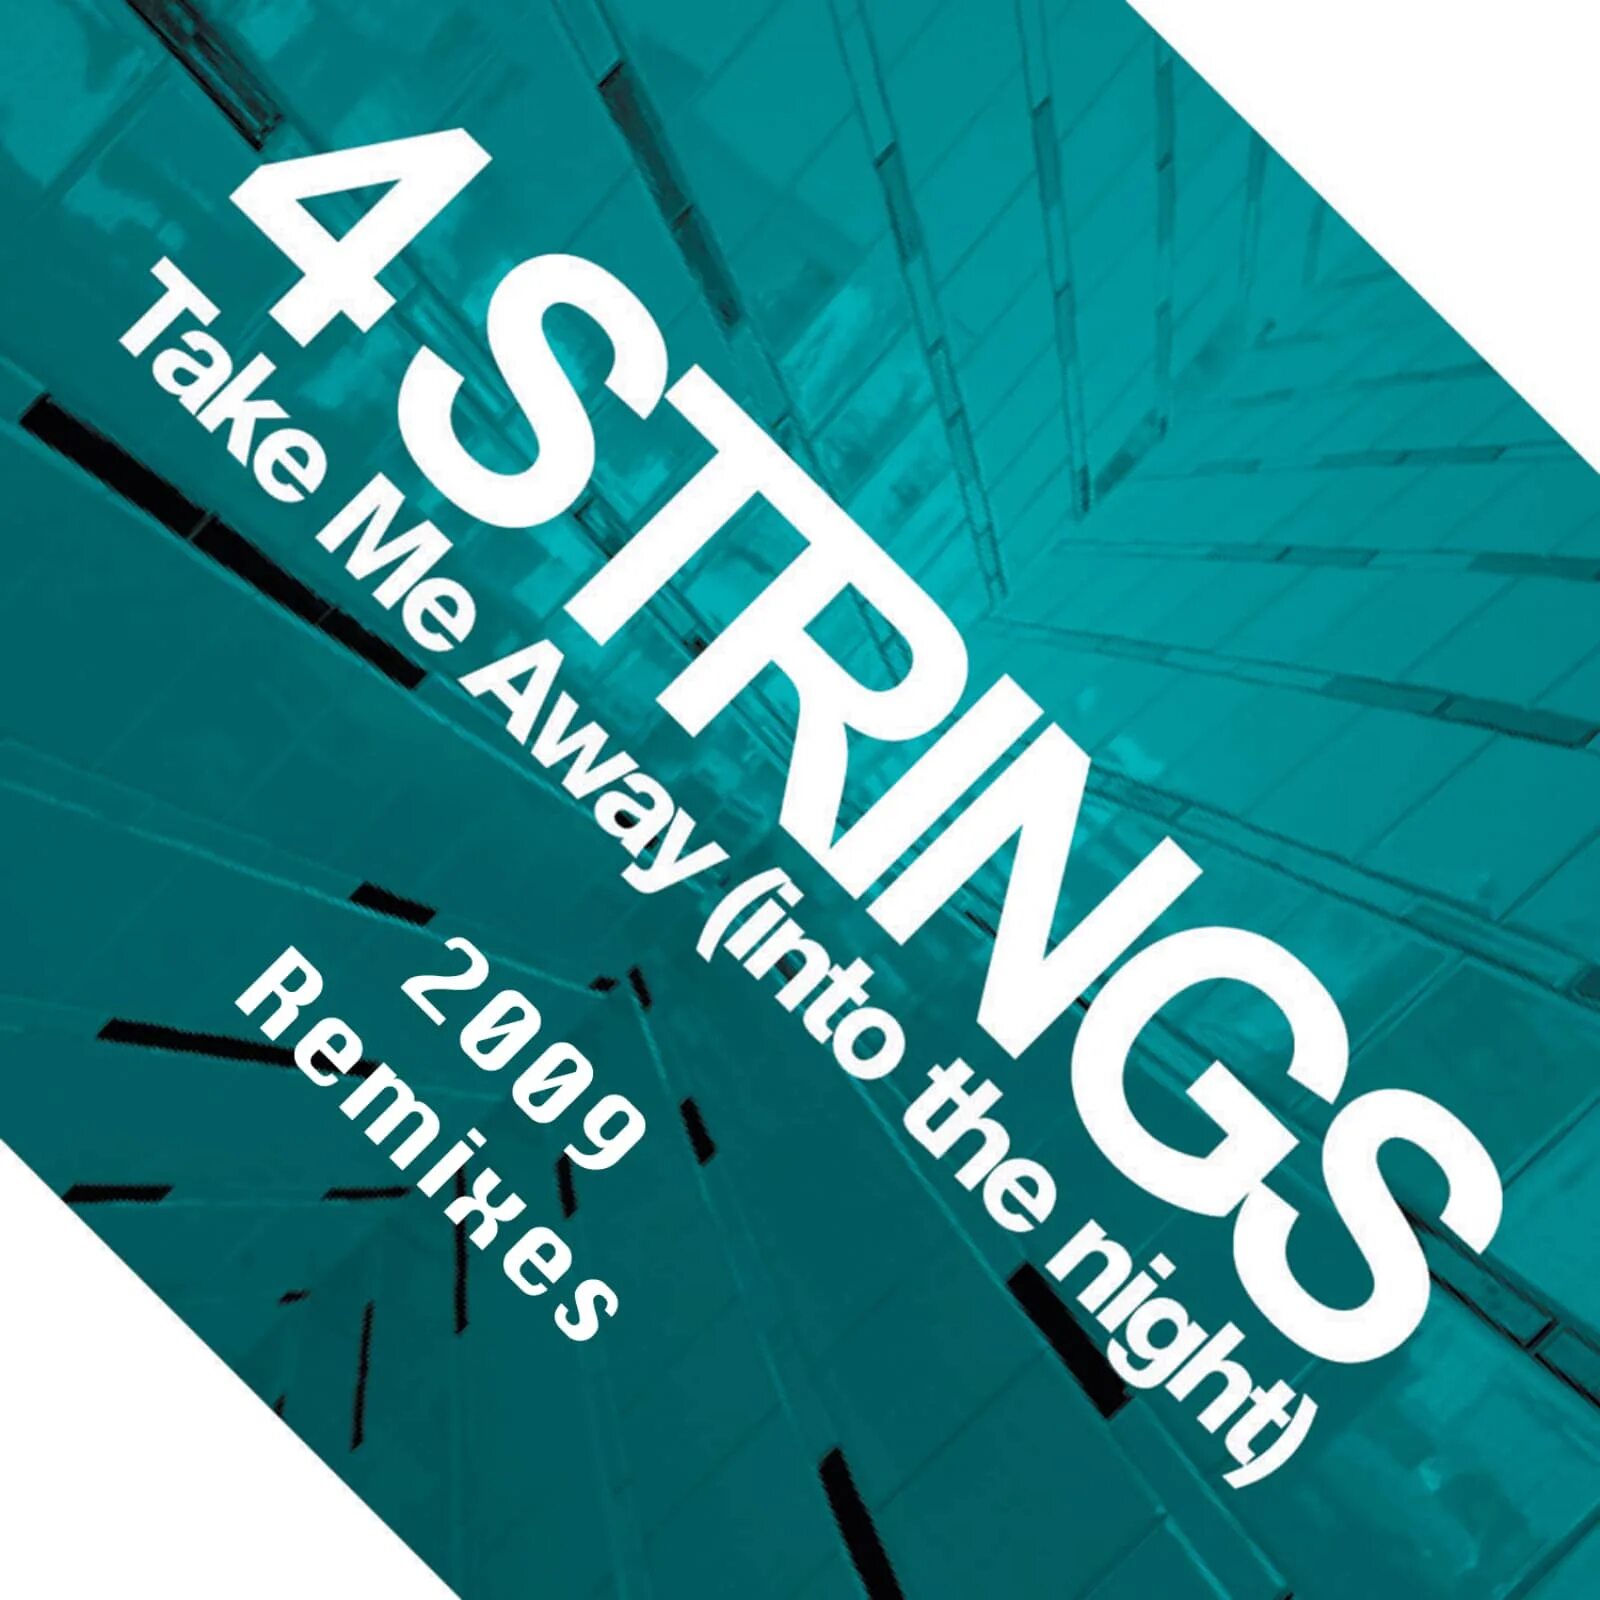 4 Strings - take me away (into the Night). 4 Strings. Группа 4 Strings. 4 Strings - into the Night (Original Mix).